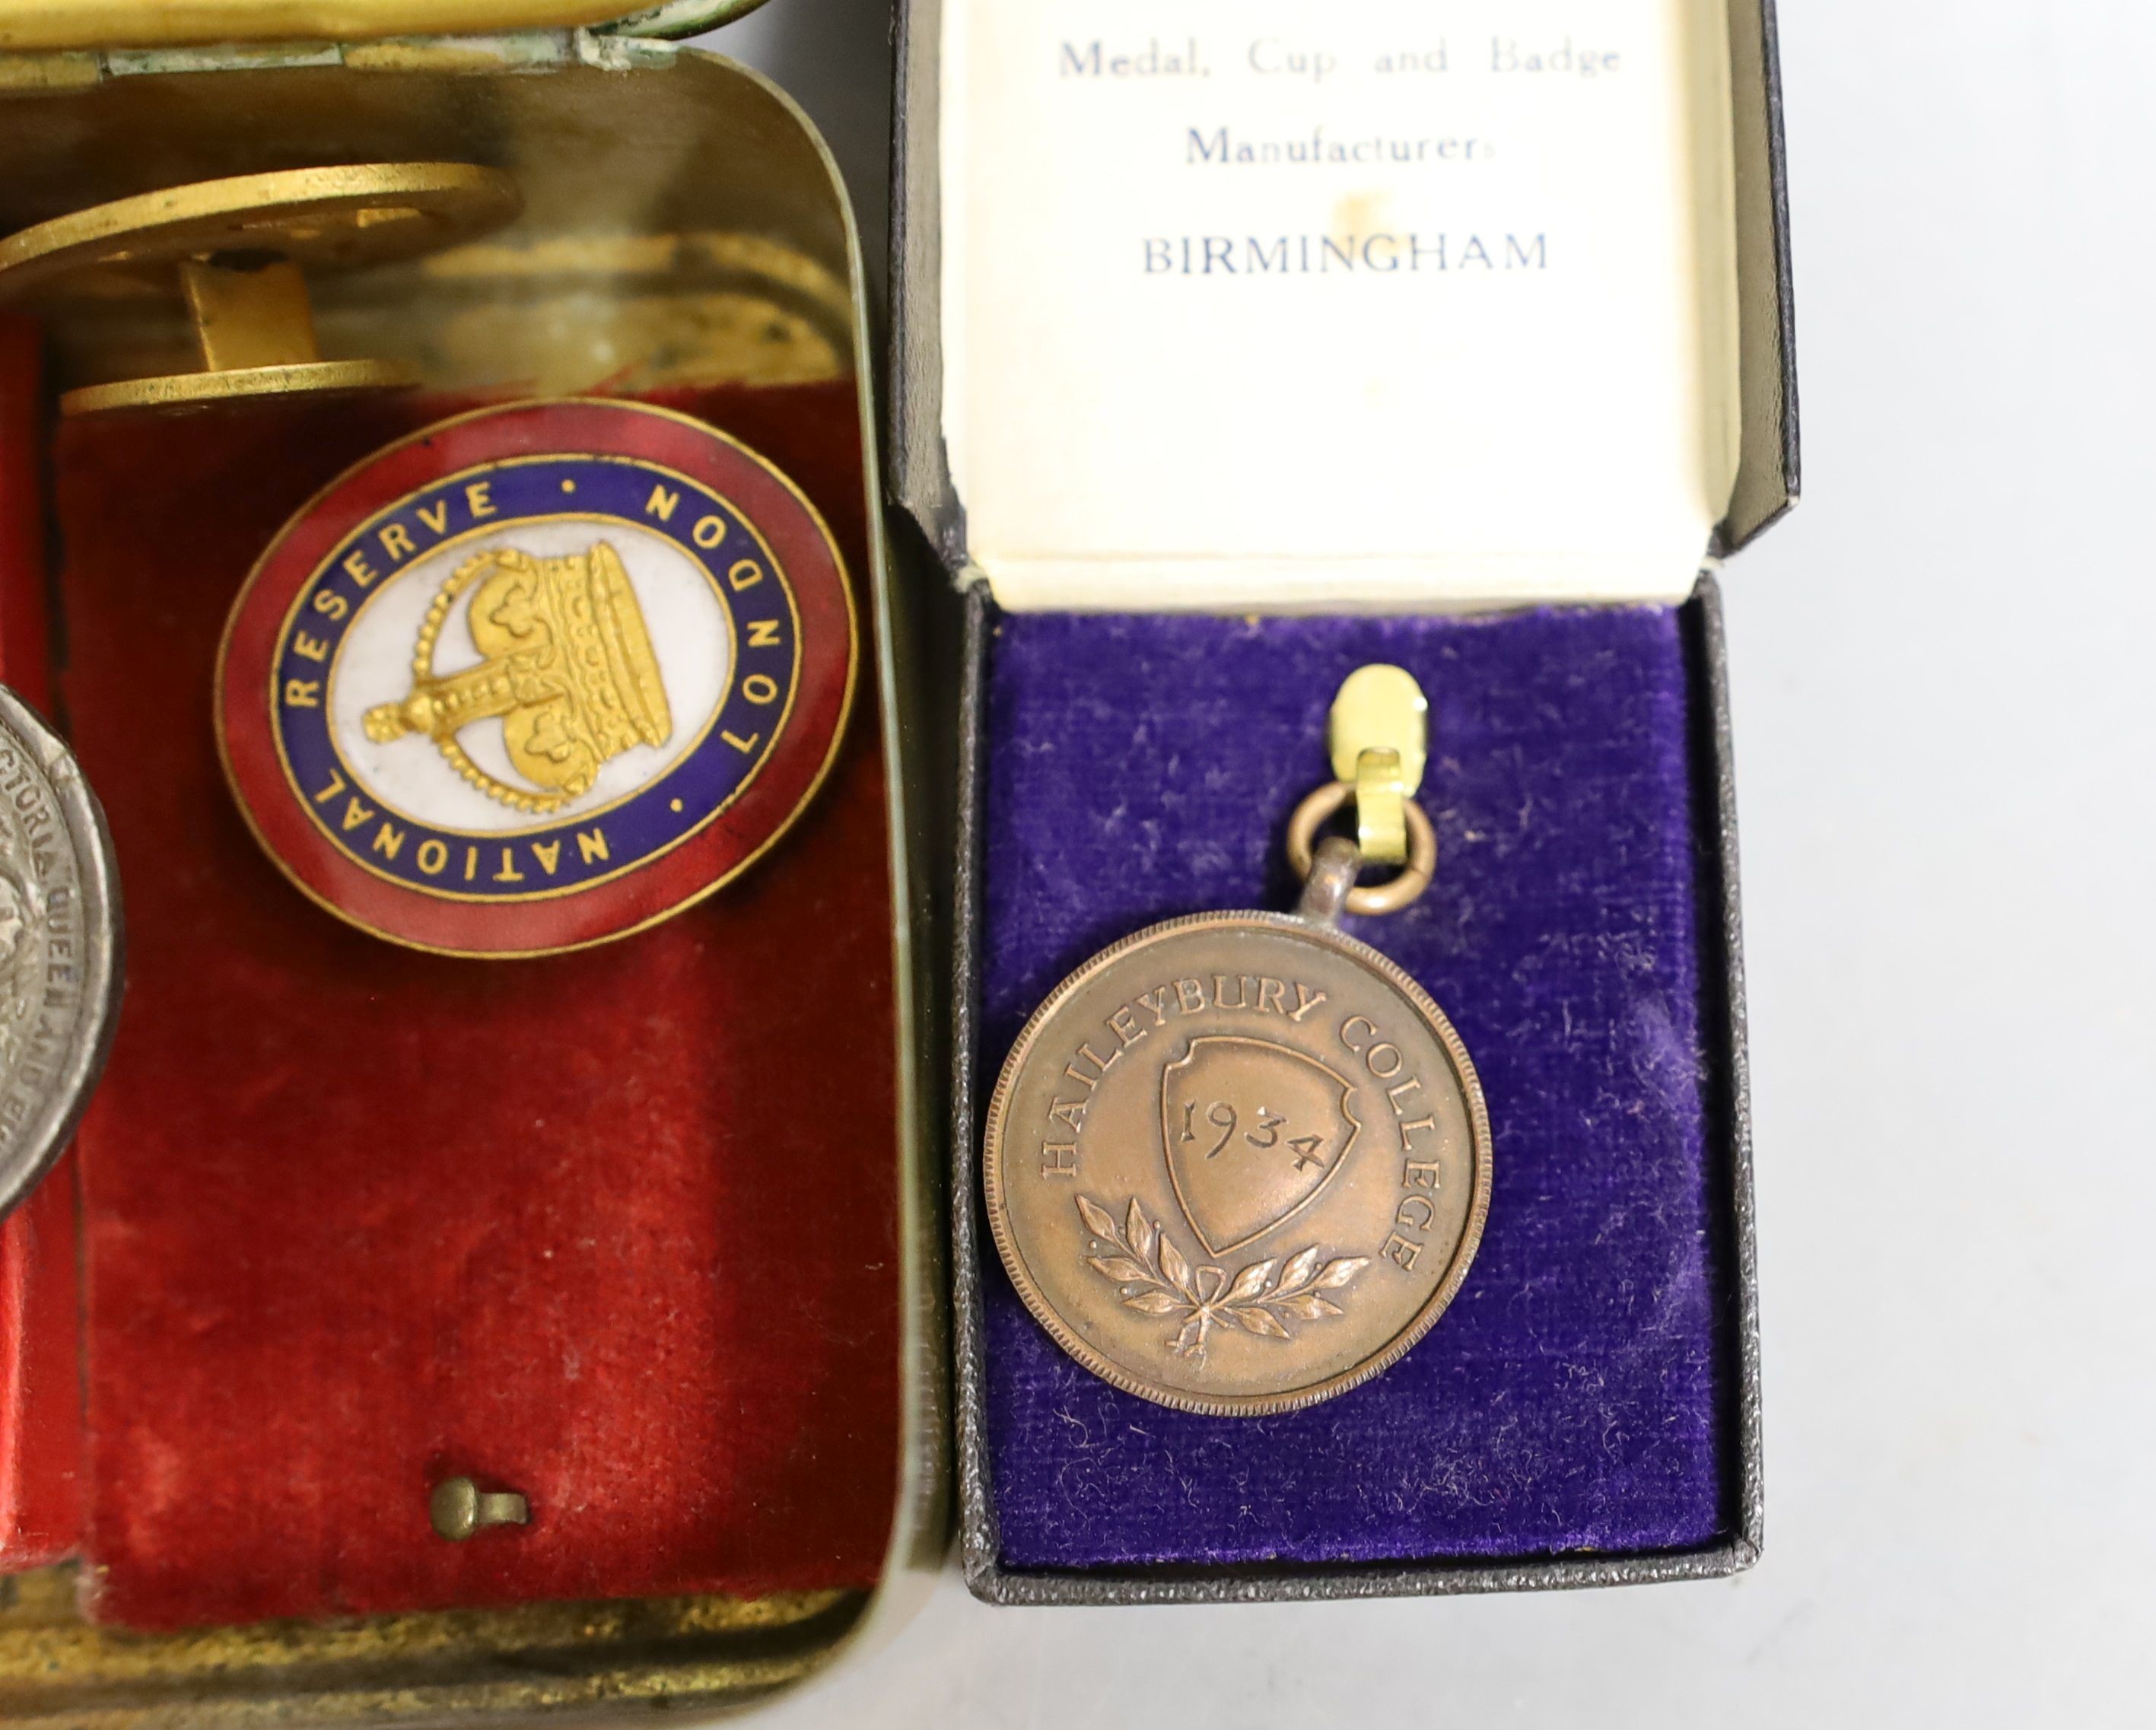 A WWI Queen Mary Christmas box, two National reserve London enamelled badges and two college medals to G. Lovegrove